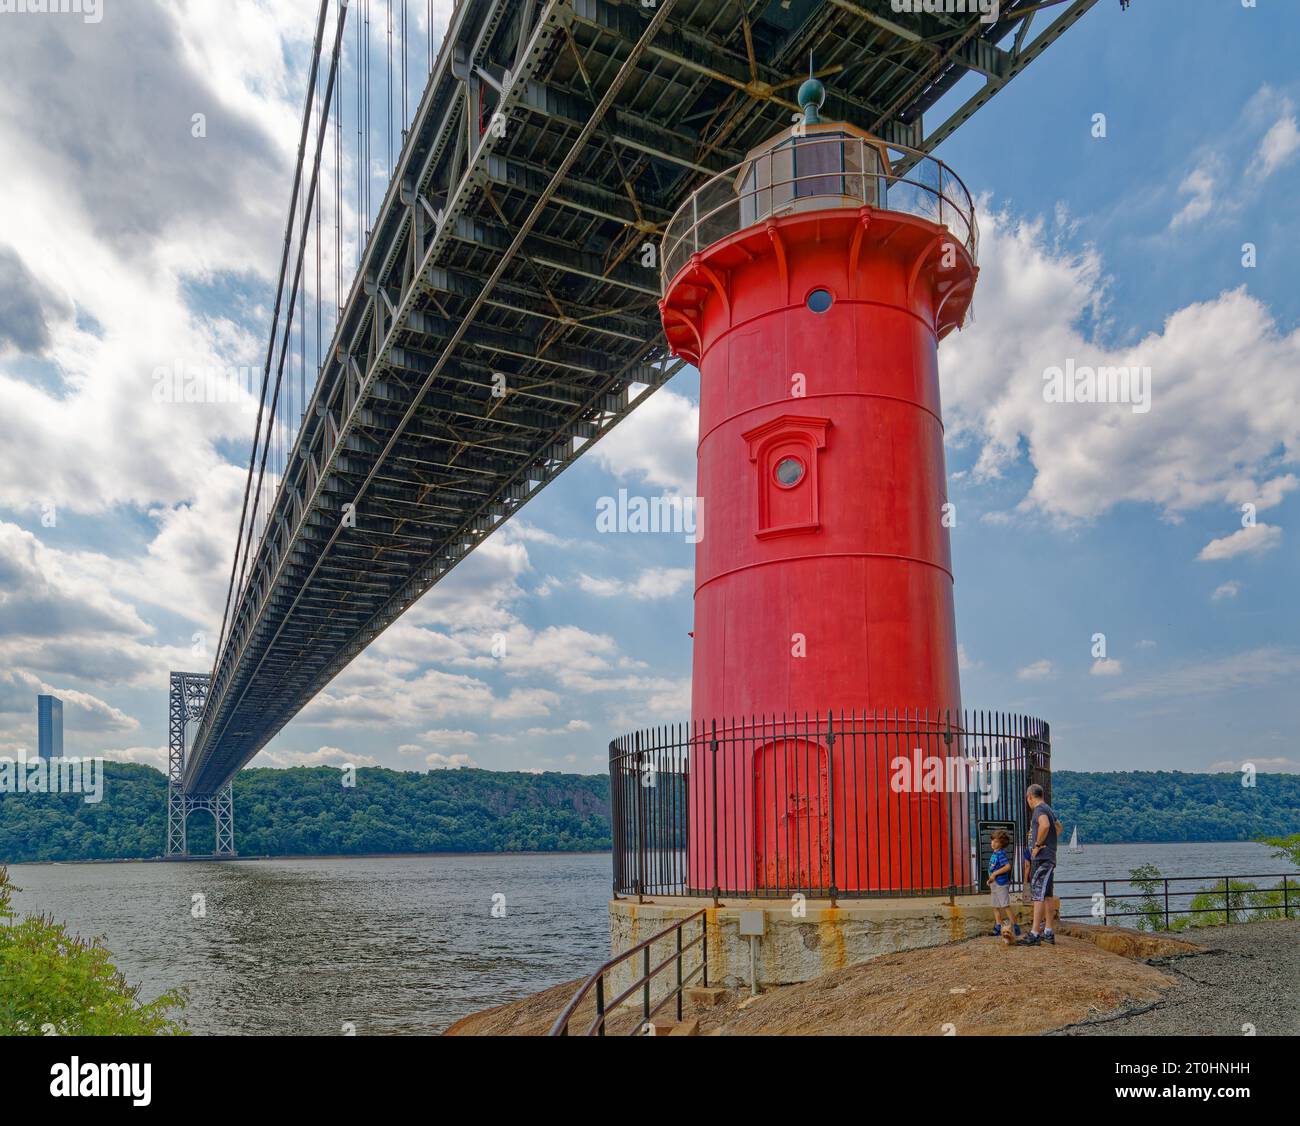 Jeffrey’s Hook Lighthouse, aka Little Red Lighthouse, built in 1880 at Sandy Hook, New Jersey and relocated to Fort Washington Park in 1921. Stock Photo